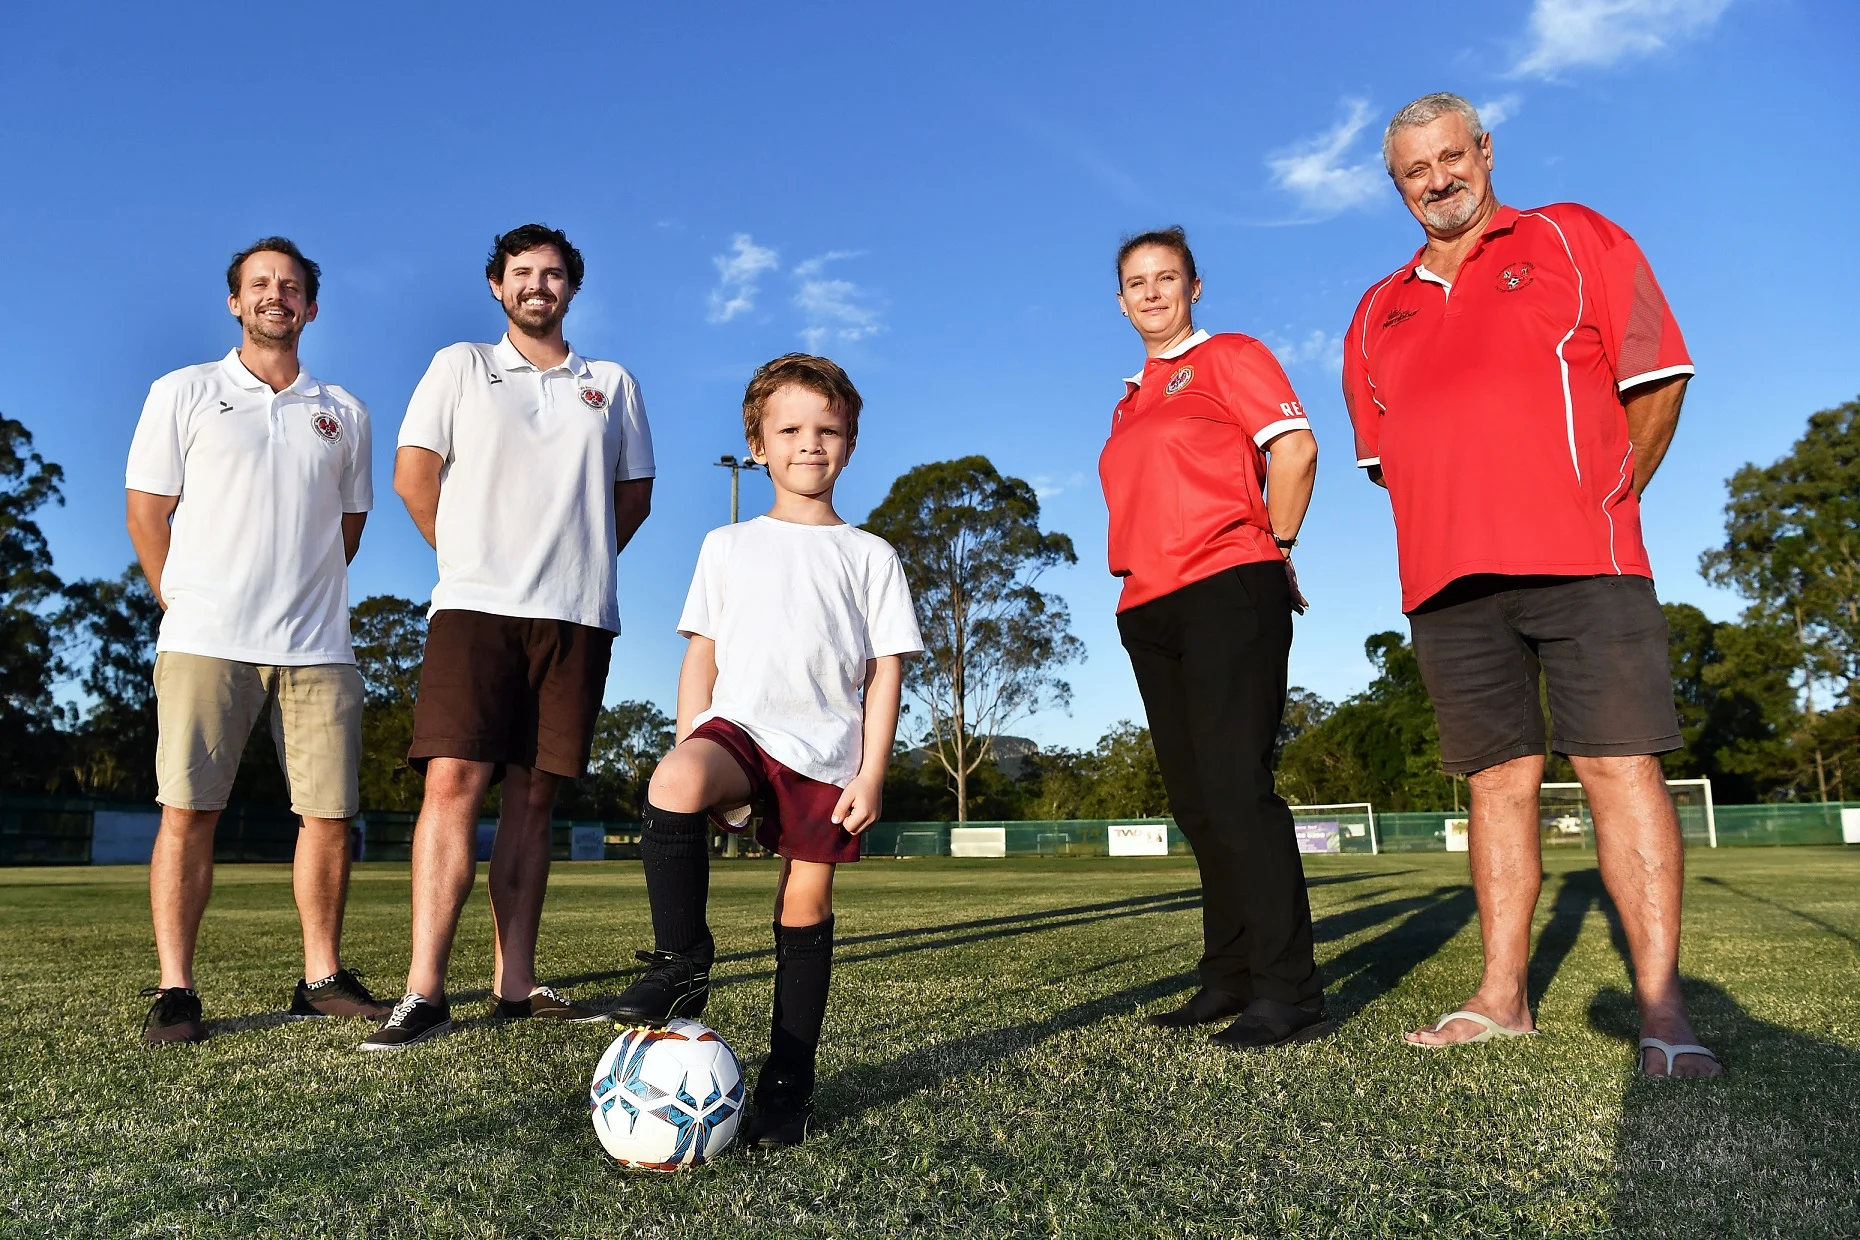 (Left to right) Three generations of another passionate Reds family: Quinn O'Keefe, Lachlan O'Keefe, Jack O'Keefe, Bonnie O'Keefe and lifetime NYU Football Club member Peter O'Keefe.